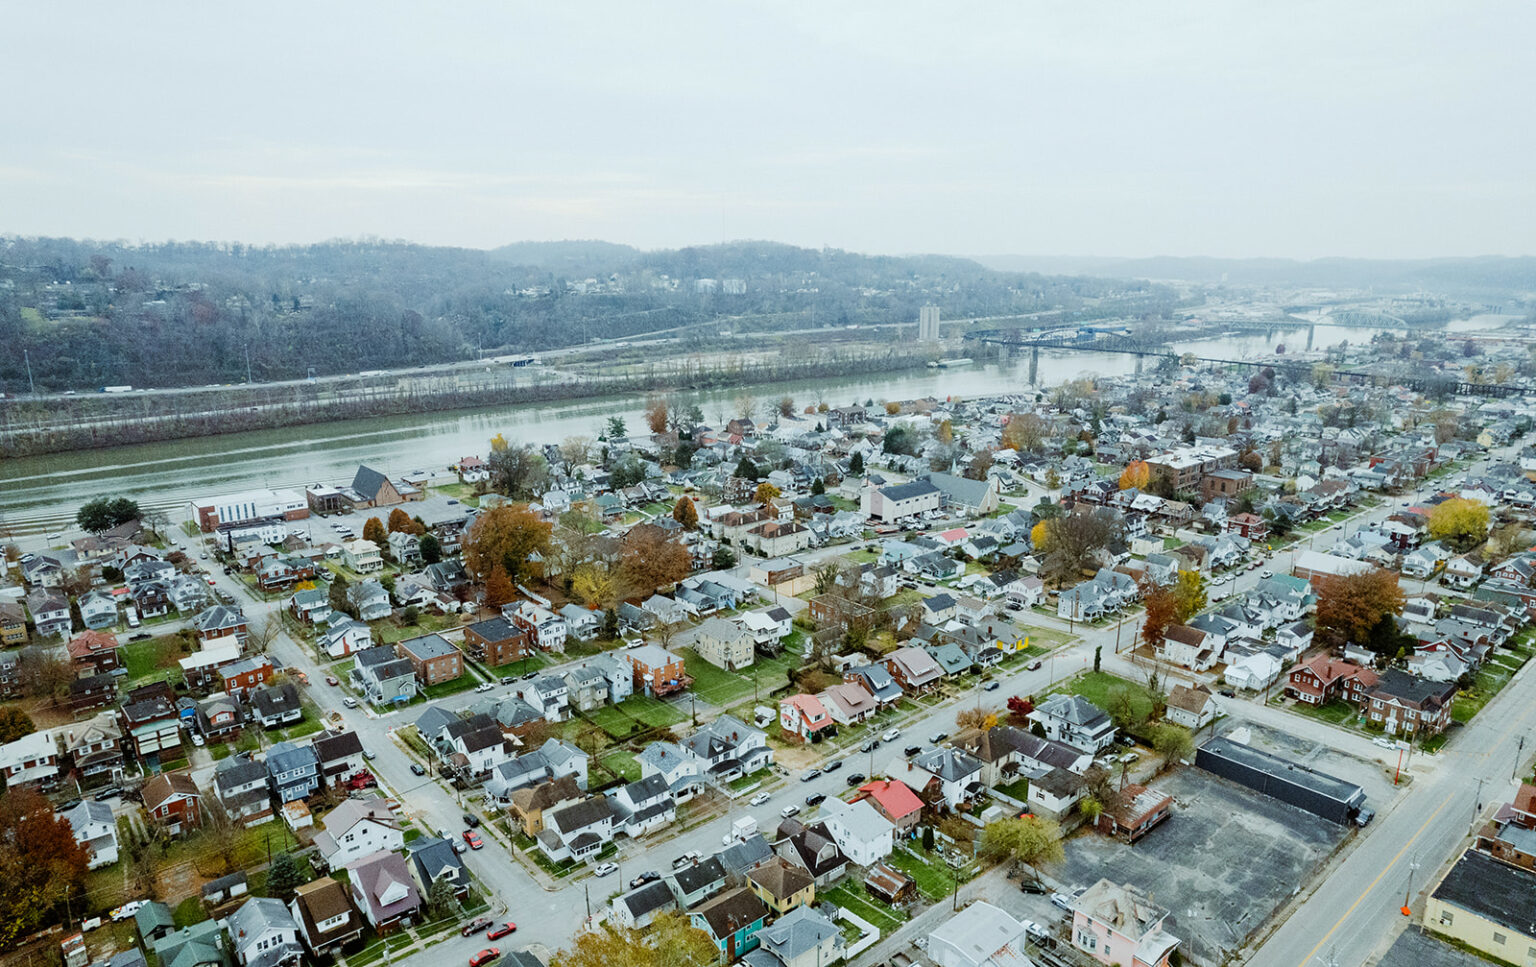 Overview of a riverside Appalachian community and it's residential blocks.